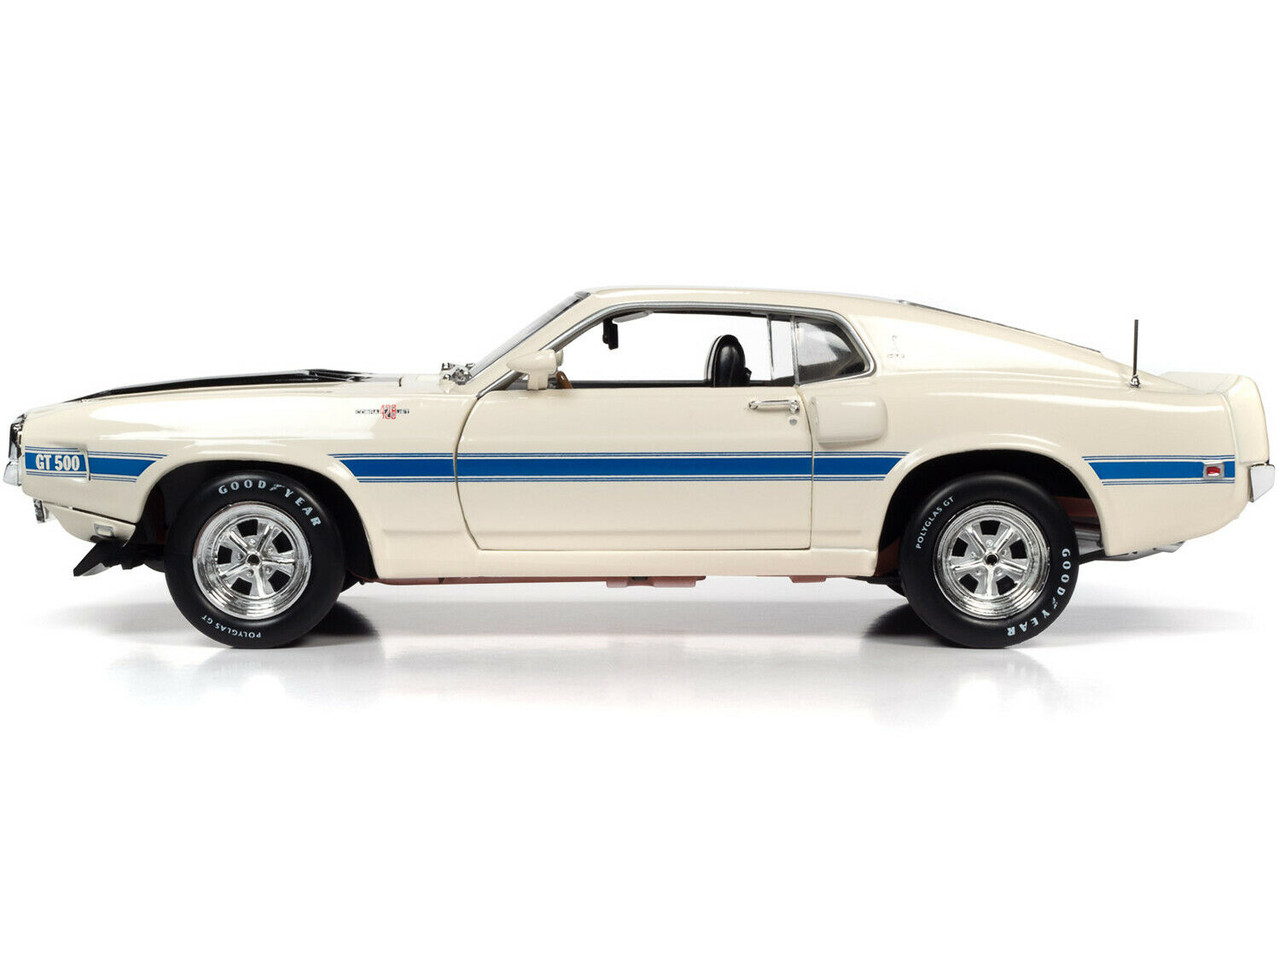 1/18 Auto World American Muscle - Class of 1970 - 1970 Shelby GT500 GT-500 (White with blue side stripe and black hood stripes) Diecast Car Model